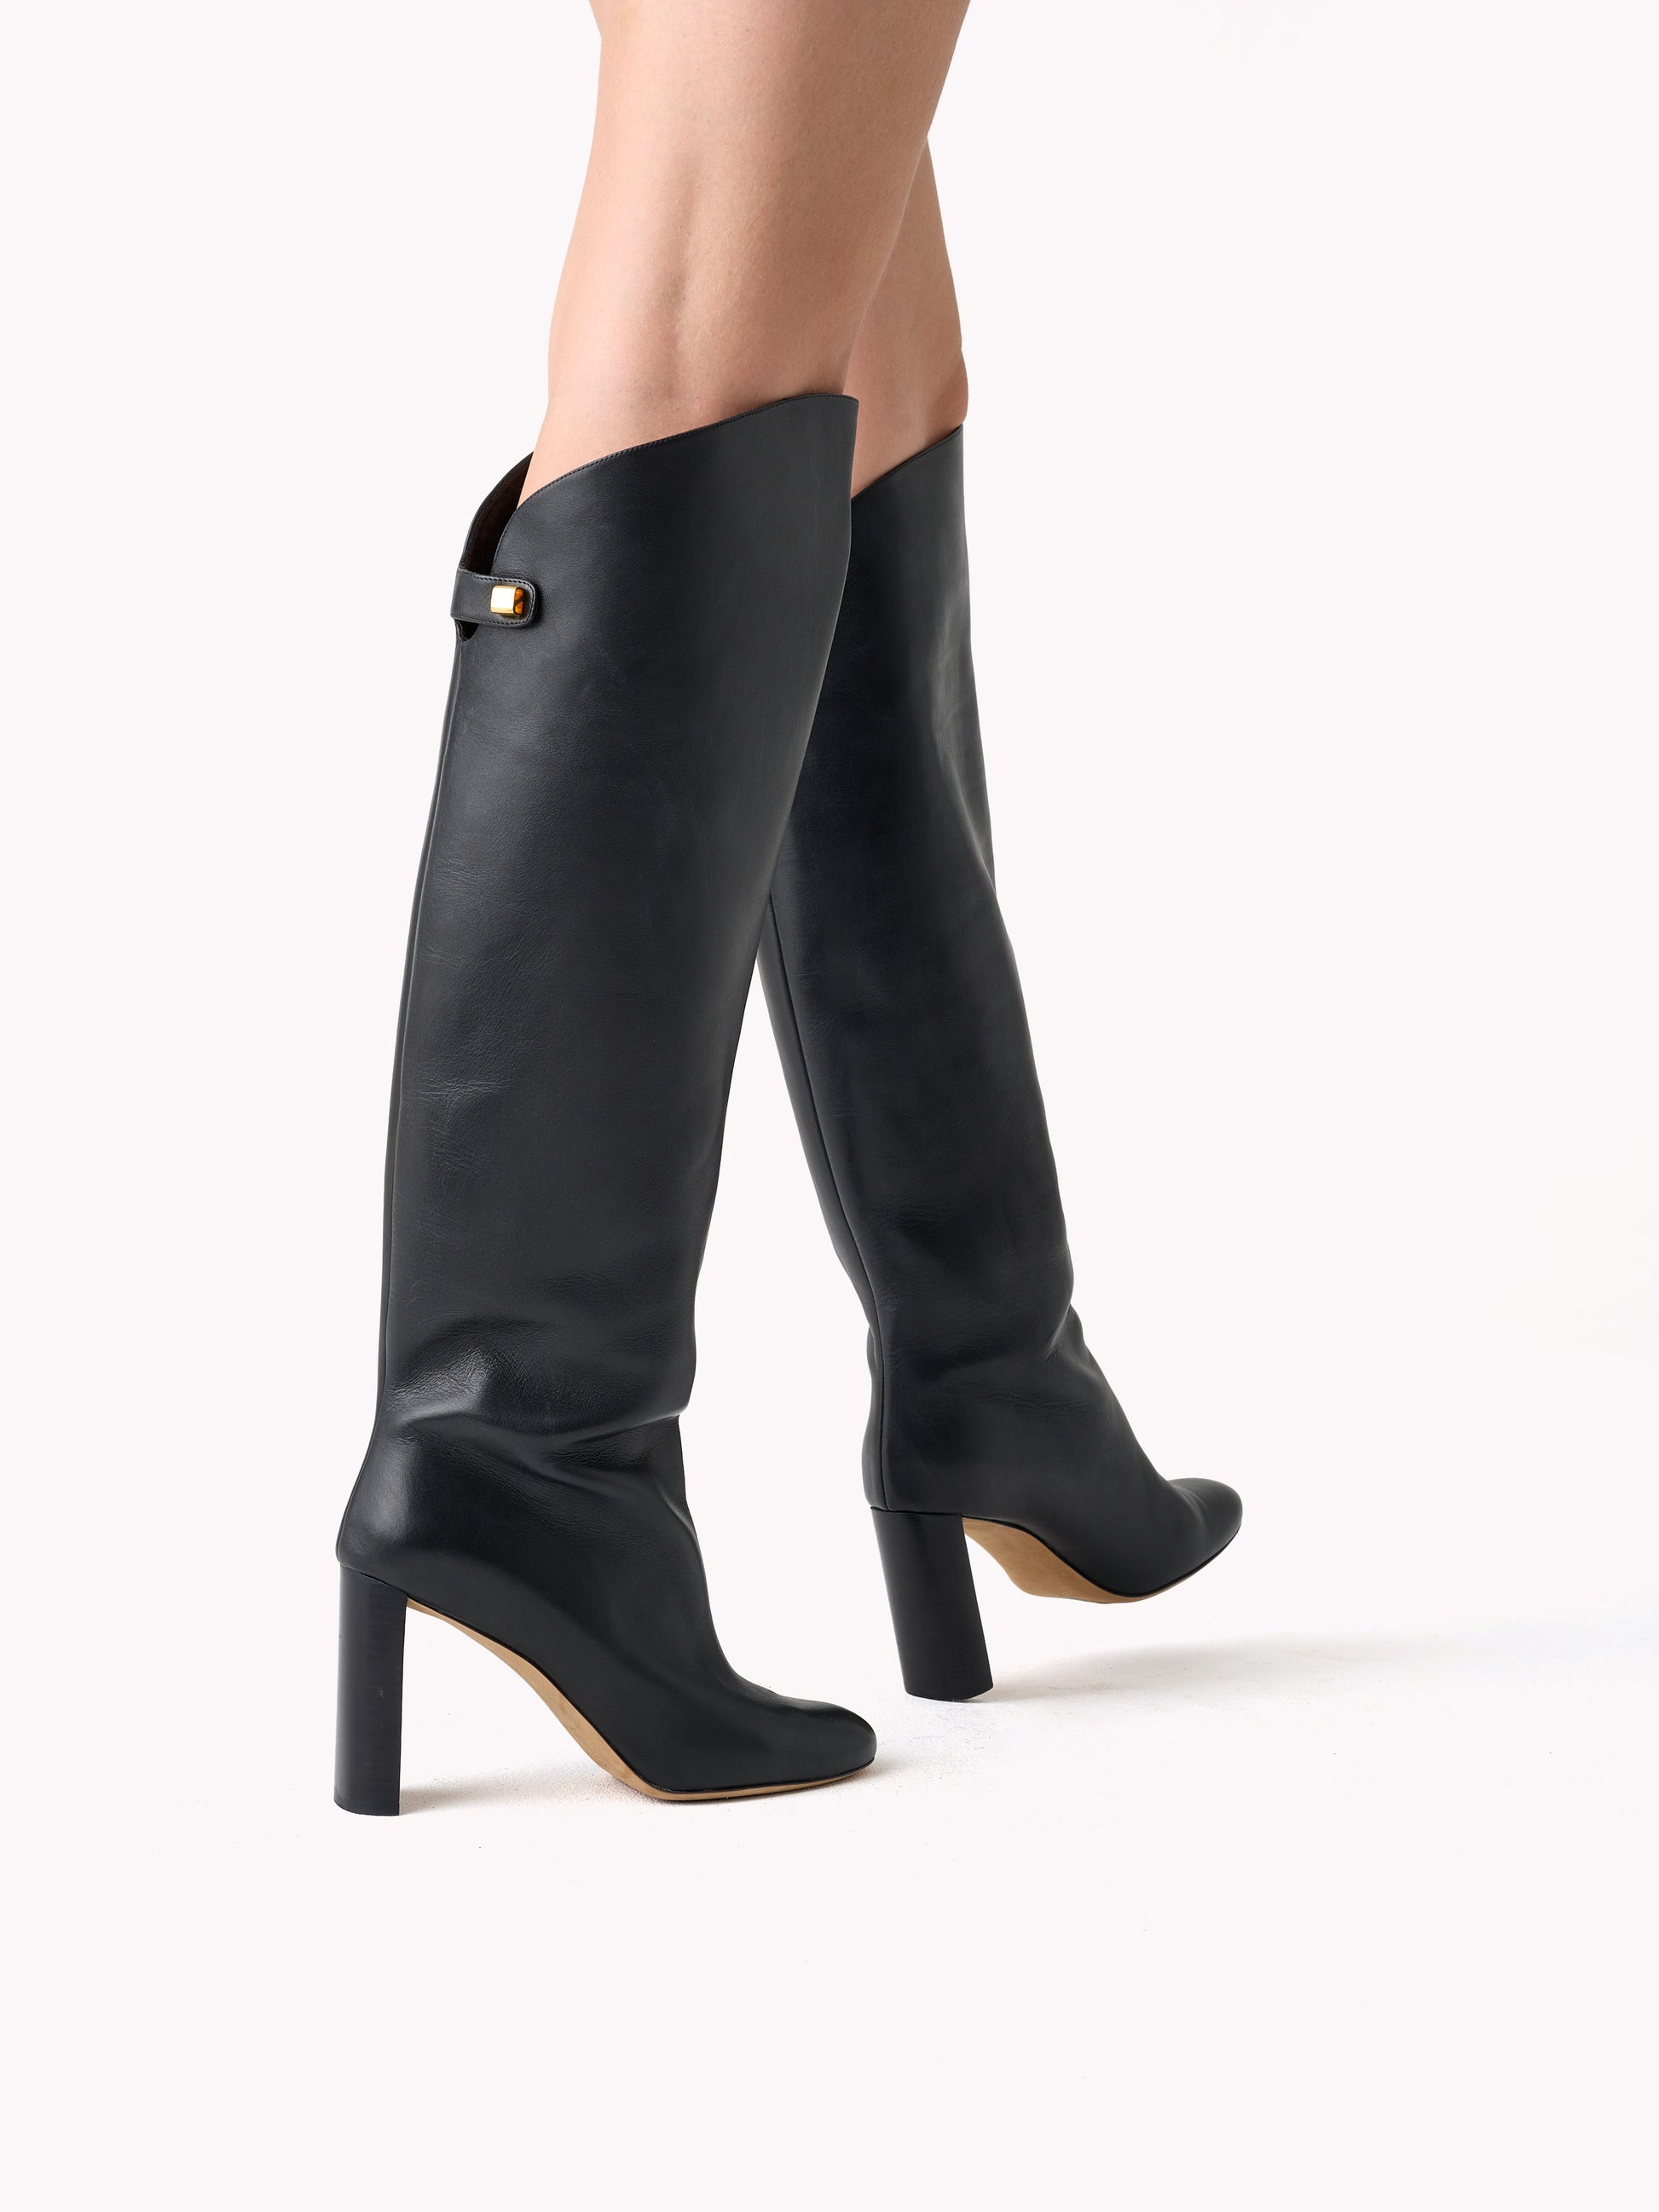 sophisticated luxury equestrian high boots in black leather with comfortable high heels skorpios